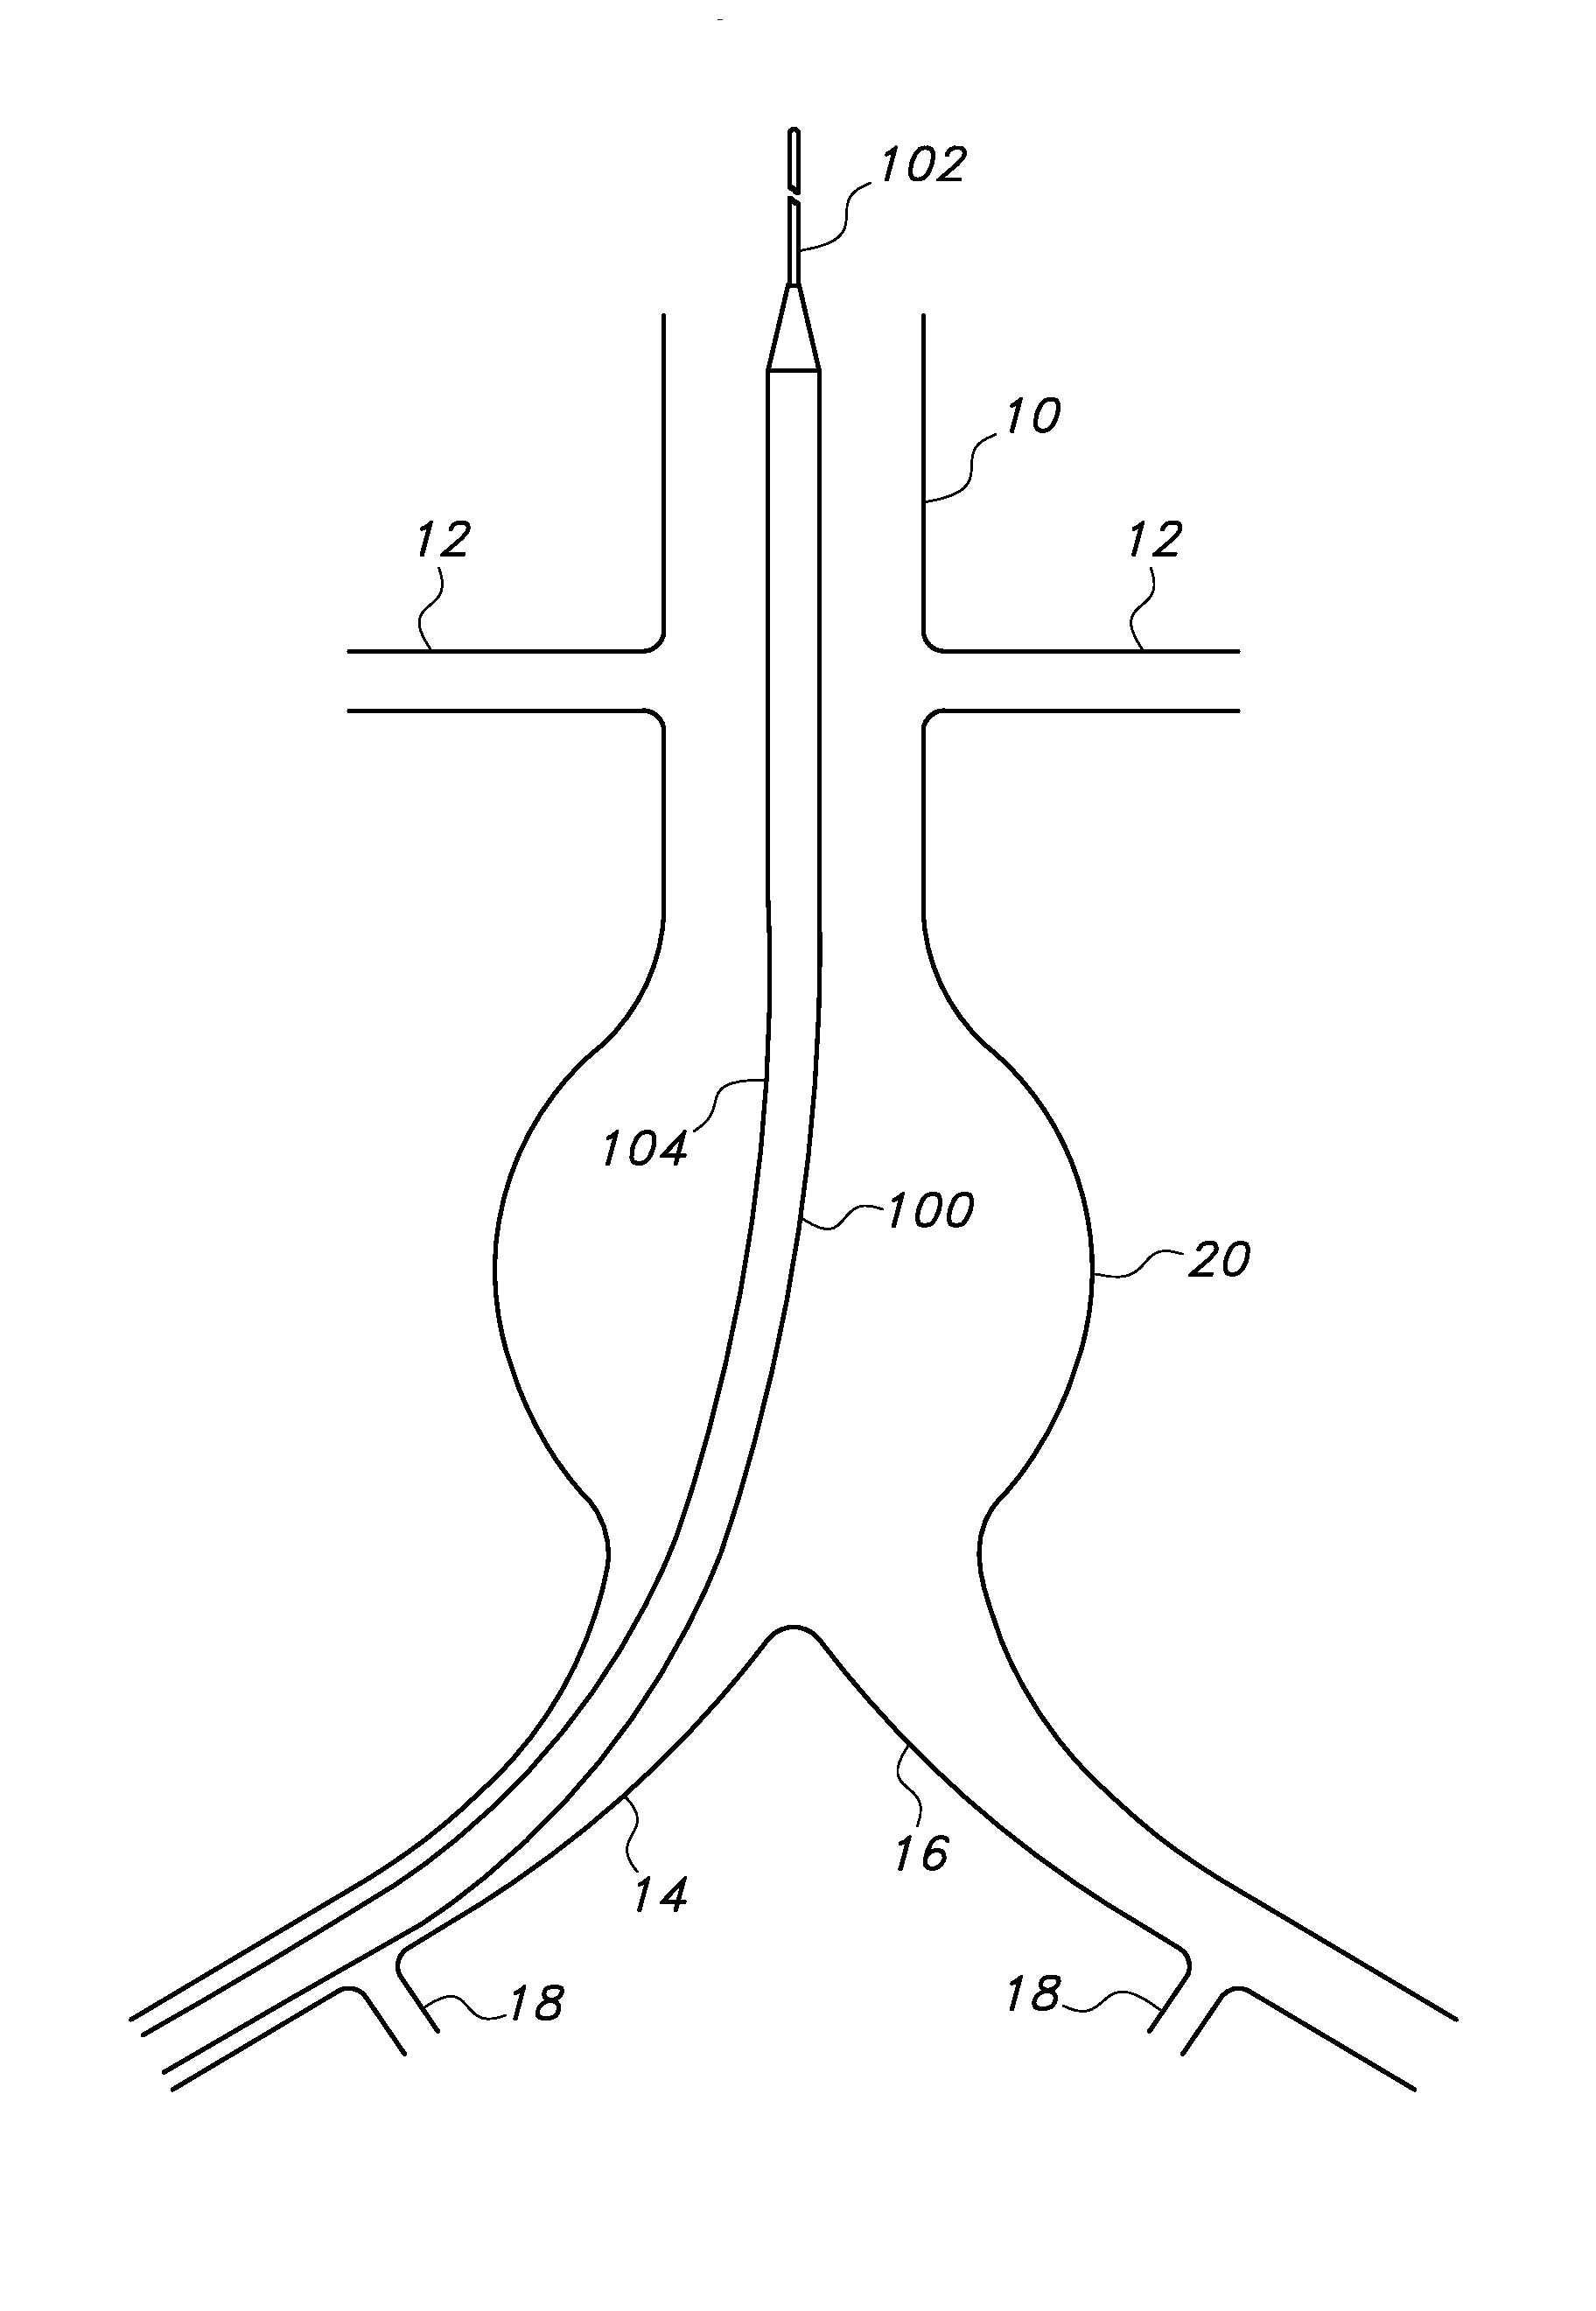 Endovascular delivery system with flexible and torqueable hypotube